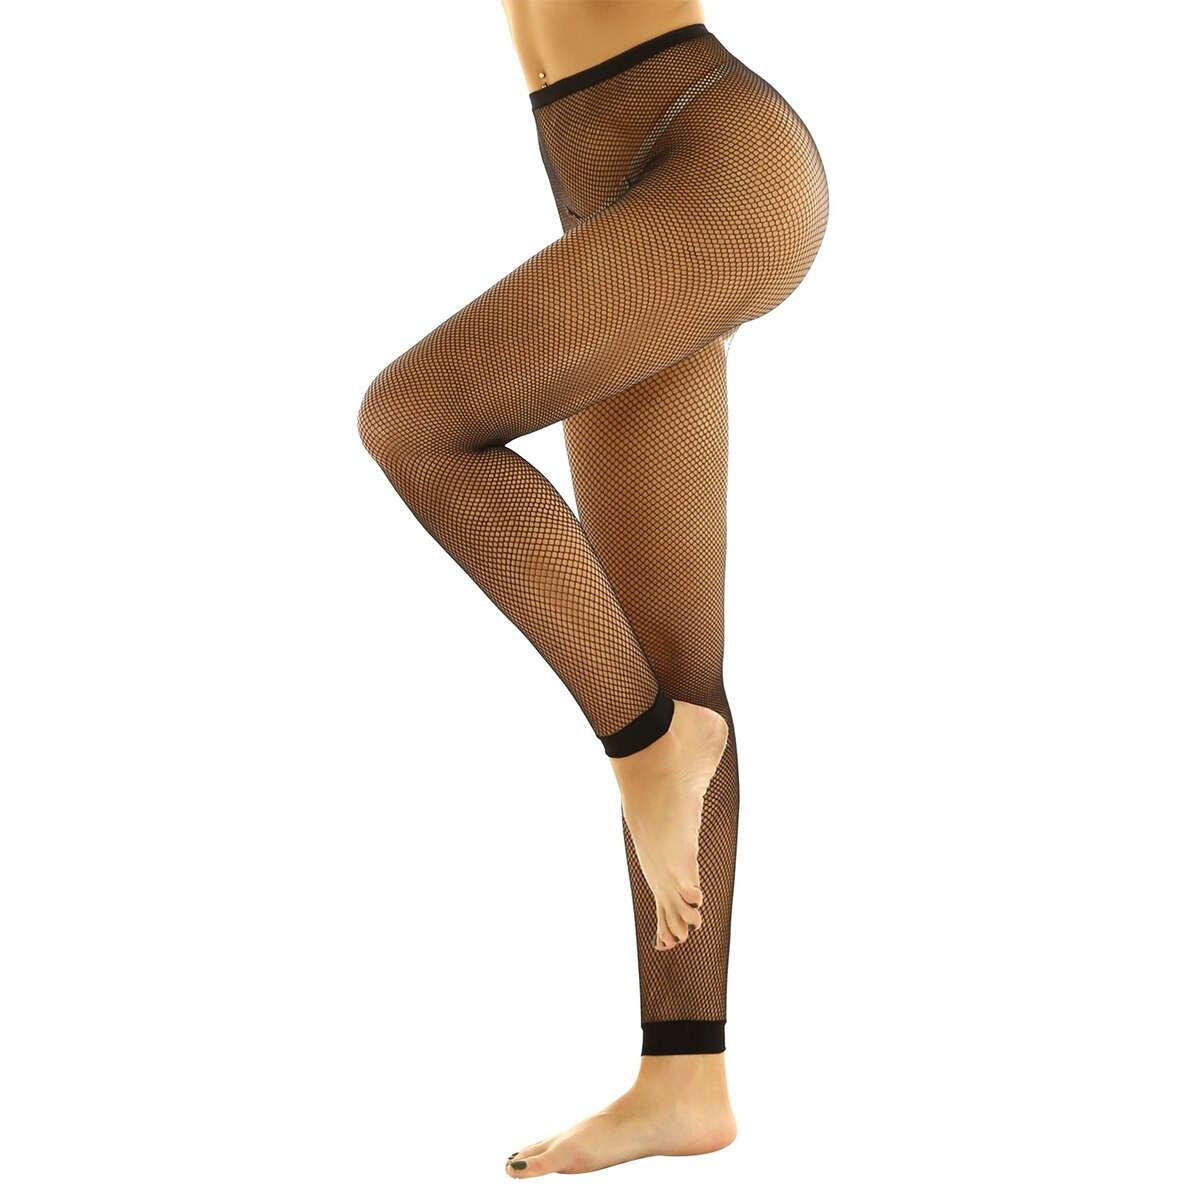 Women's Through Sheer High-Waist Hollow Out / Sexy Footless Stretchy Tights Stockings - EVE's SECRETS